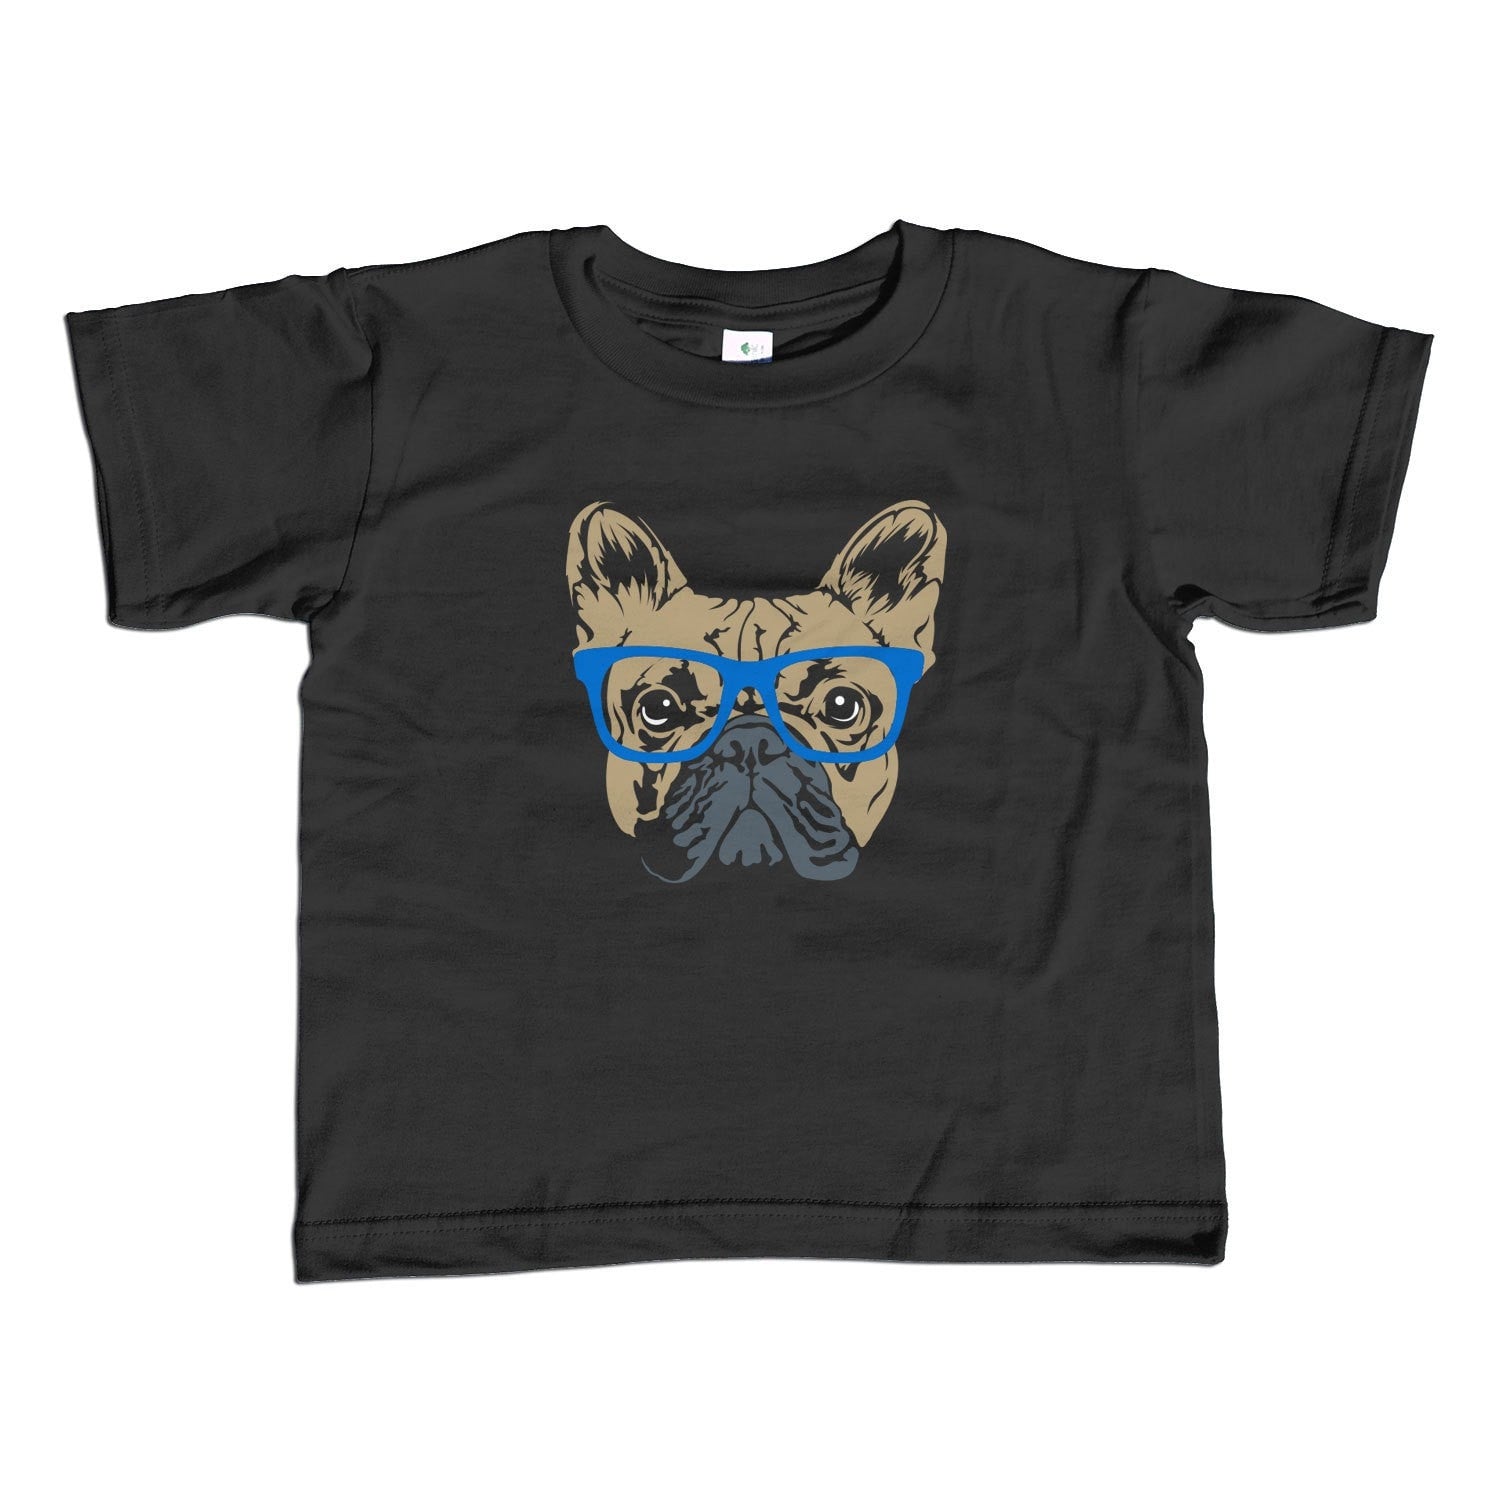 Boy's Glasses on a French Bulldog T-Shirt Hipster Frenchie